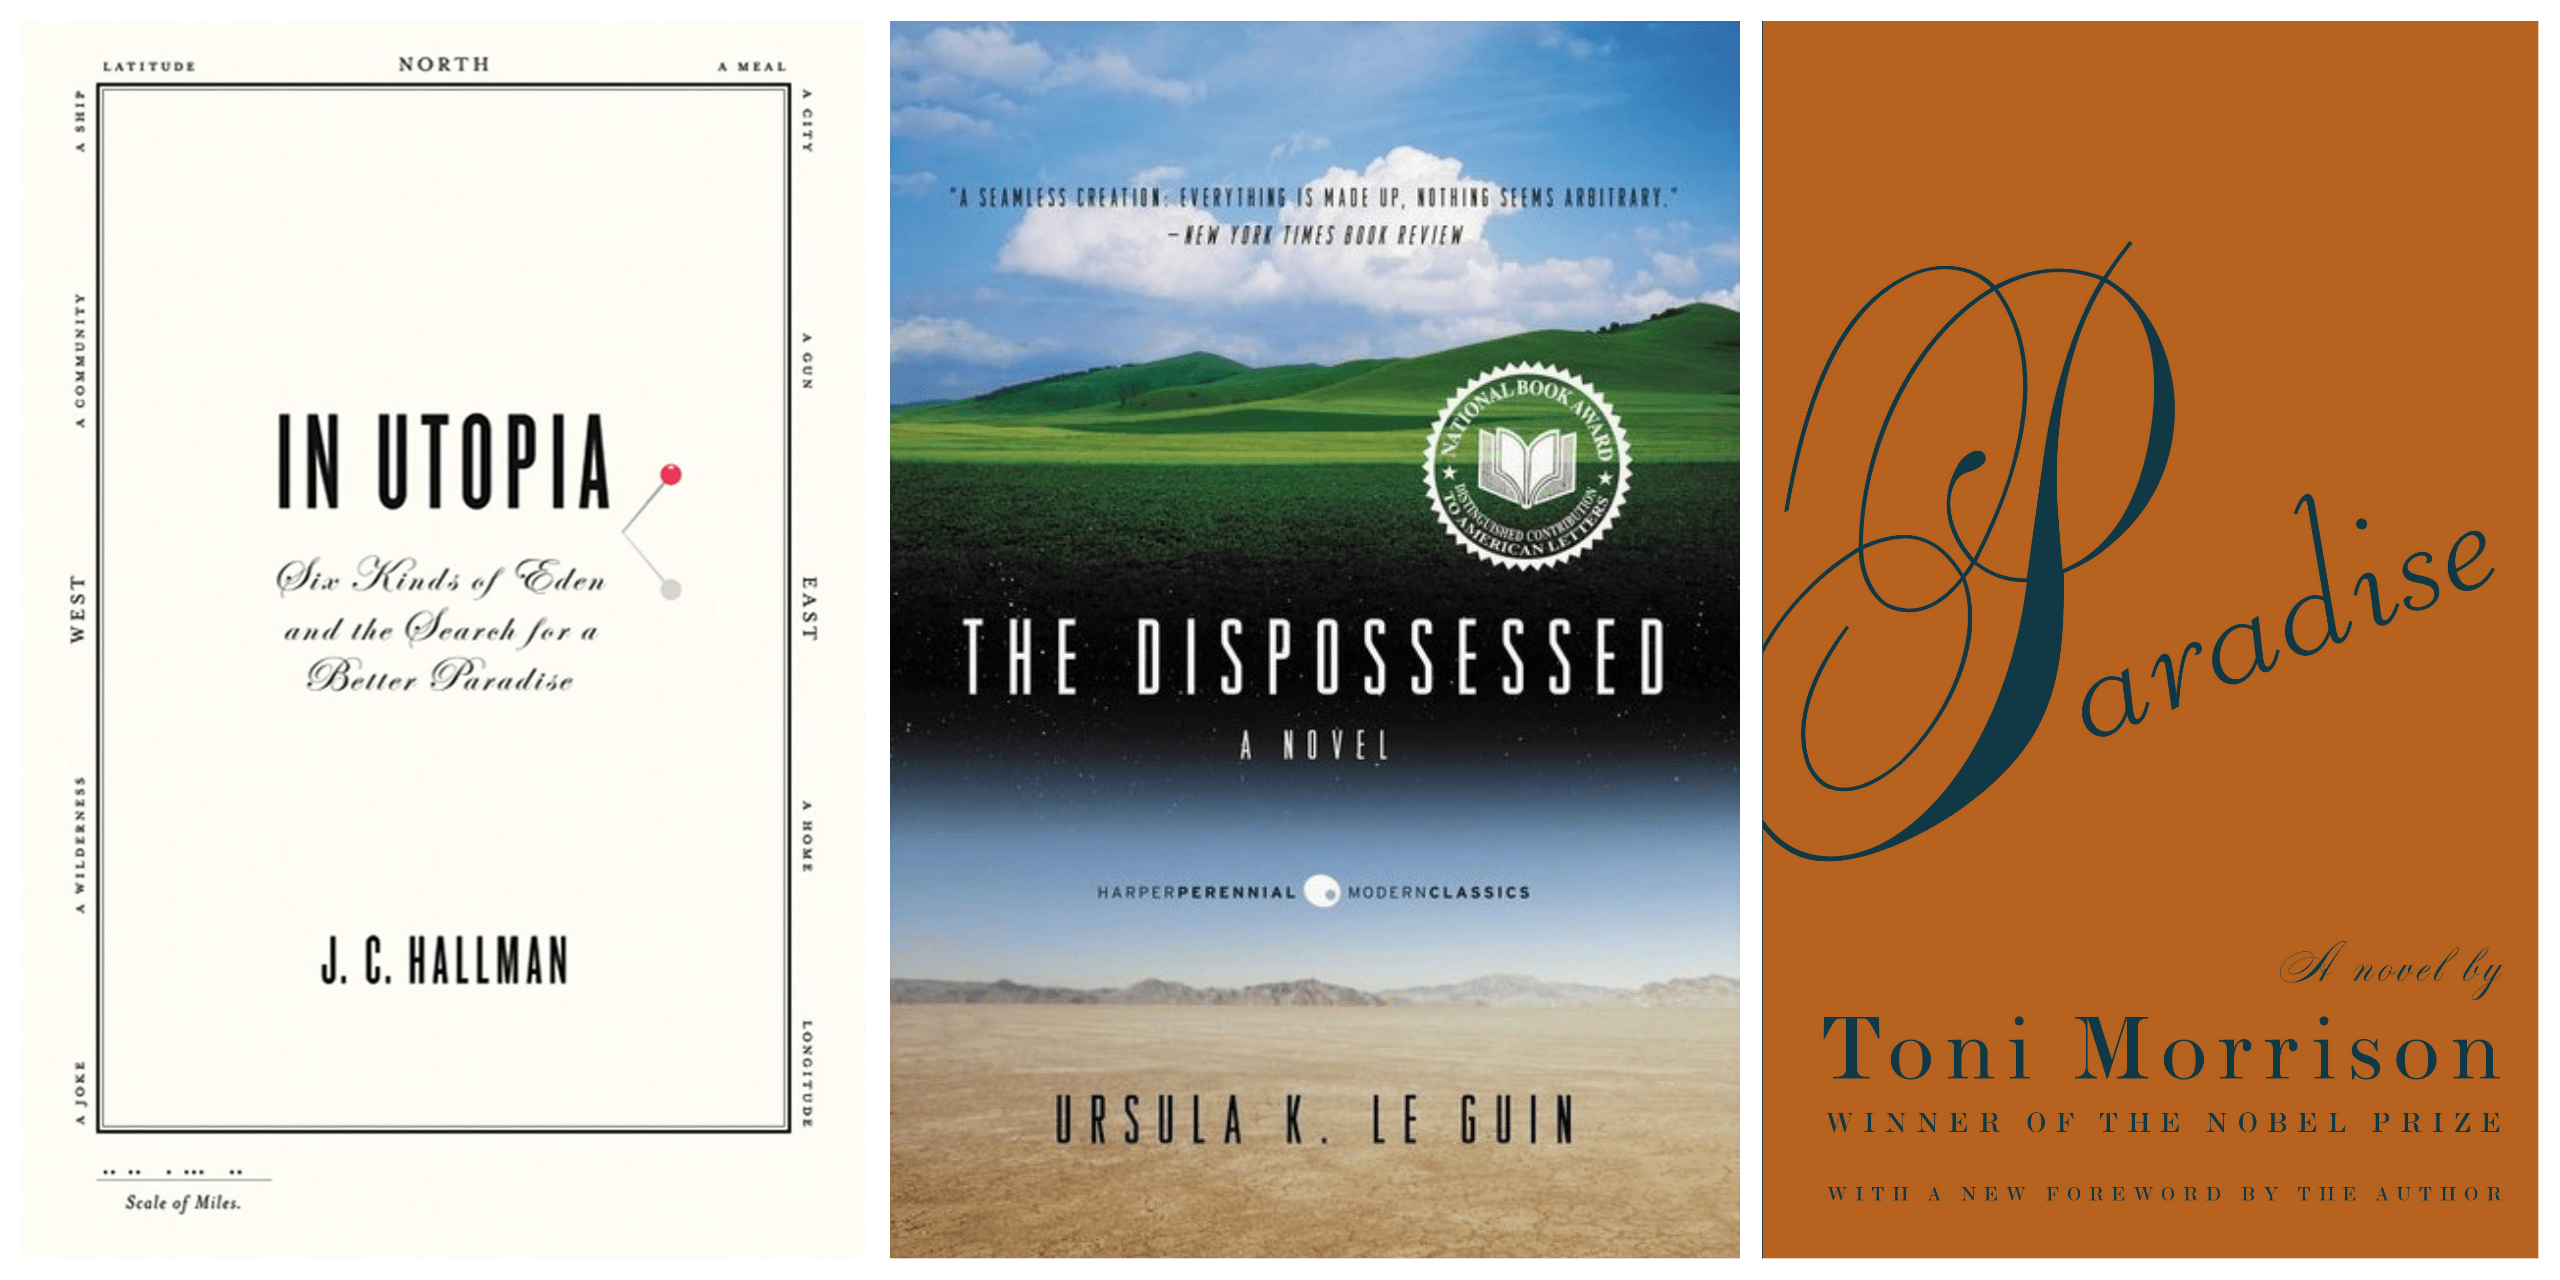 WBUR arts and culture fellow Lauren Williams recommends three books on utopia, world-building and reimagining. (Courtesy the publishers)